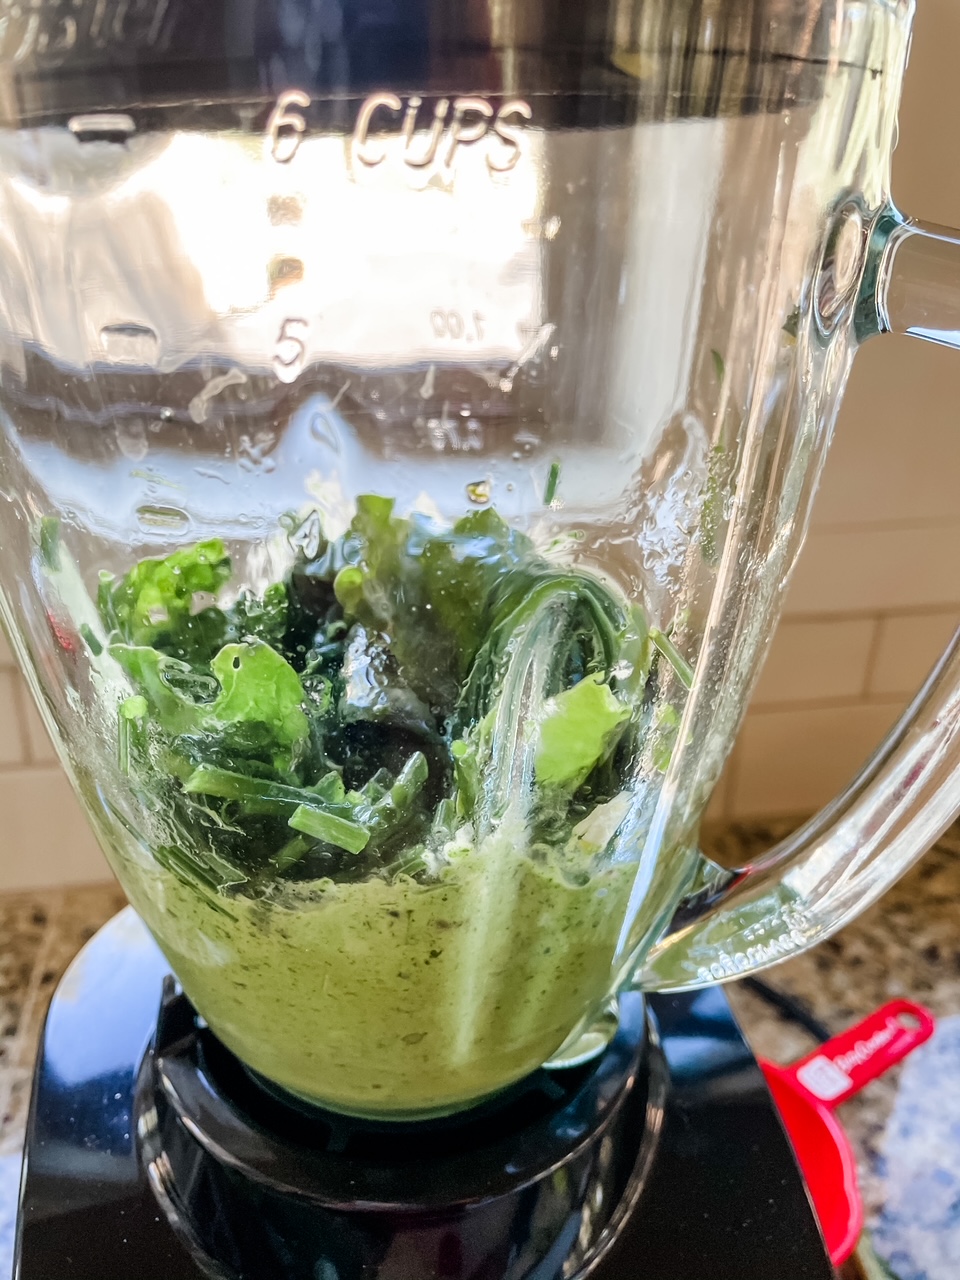 The greens prepped to mixed in a blender